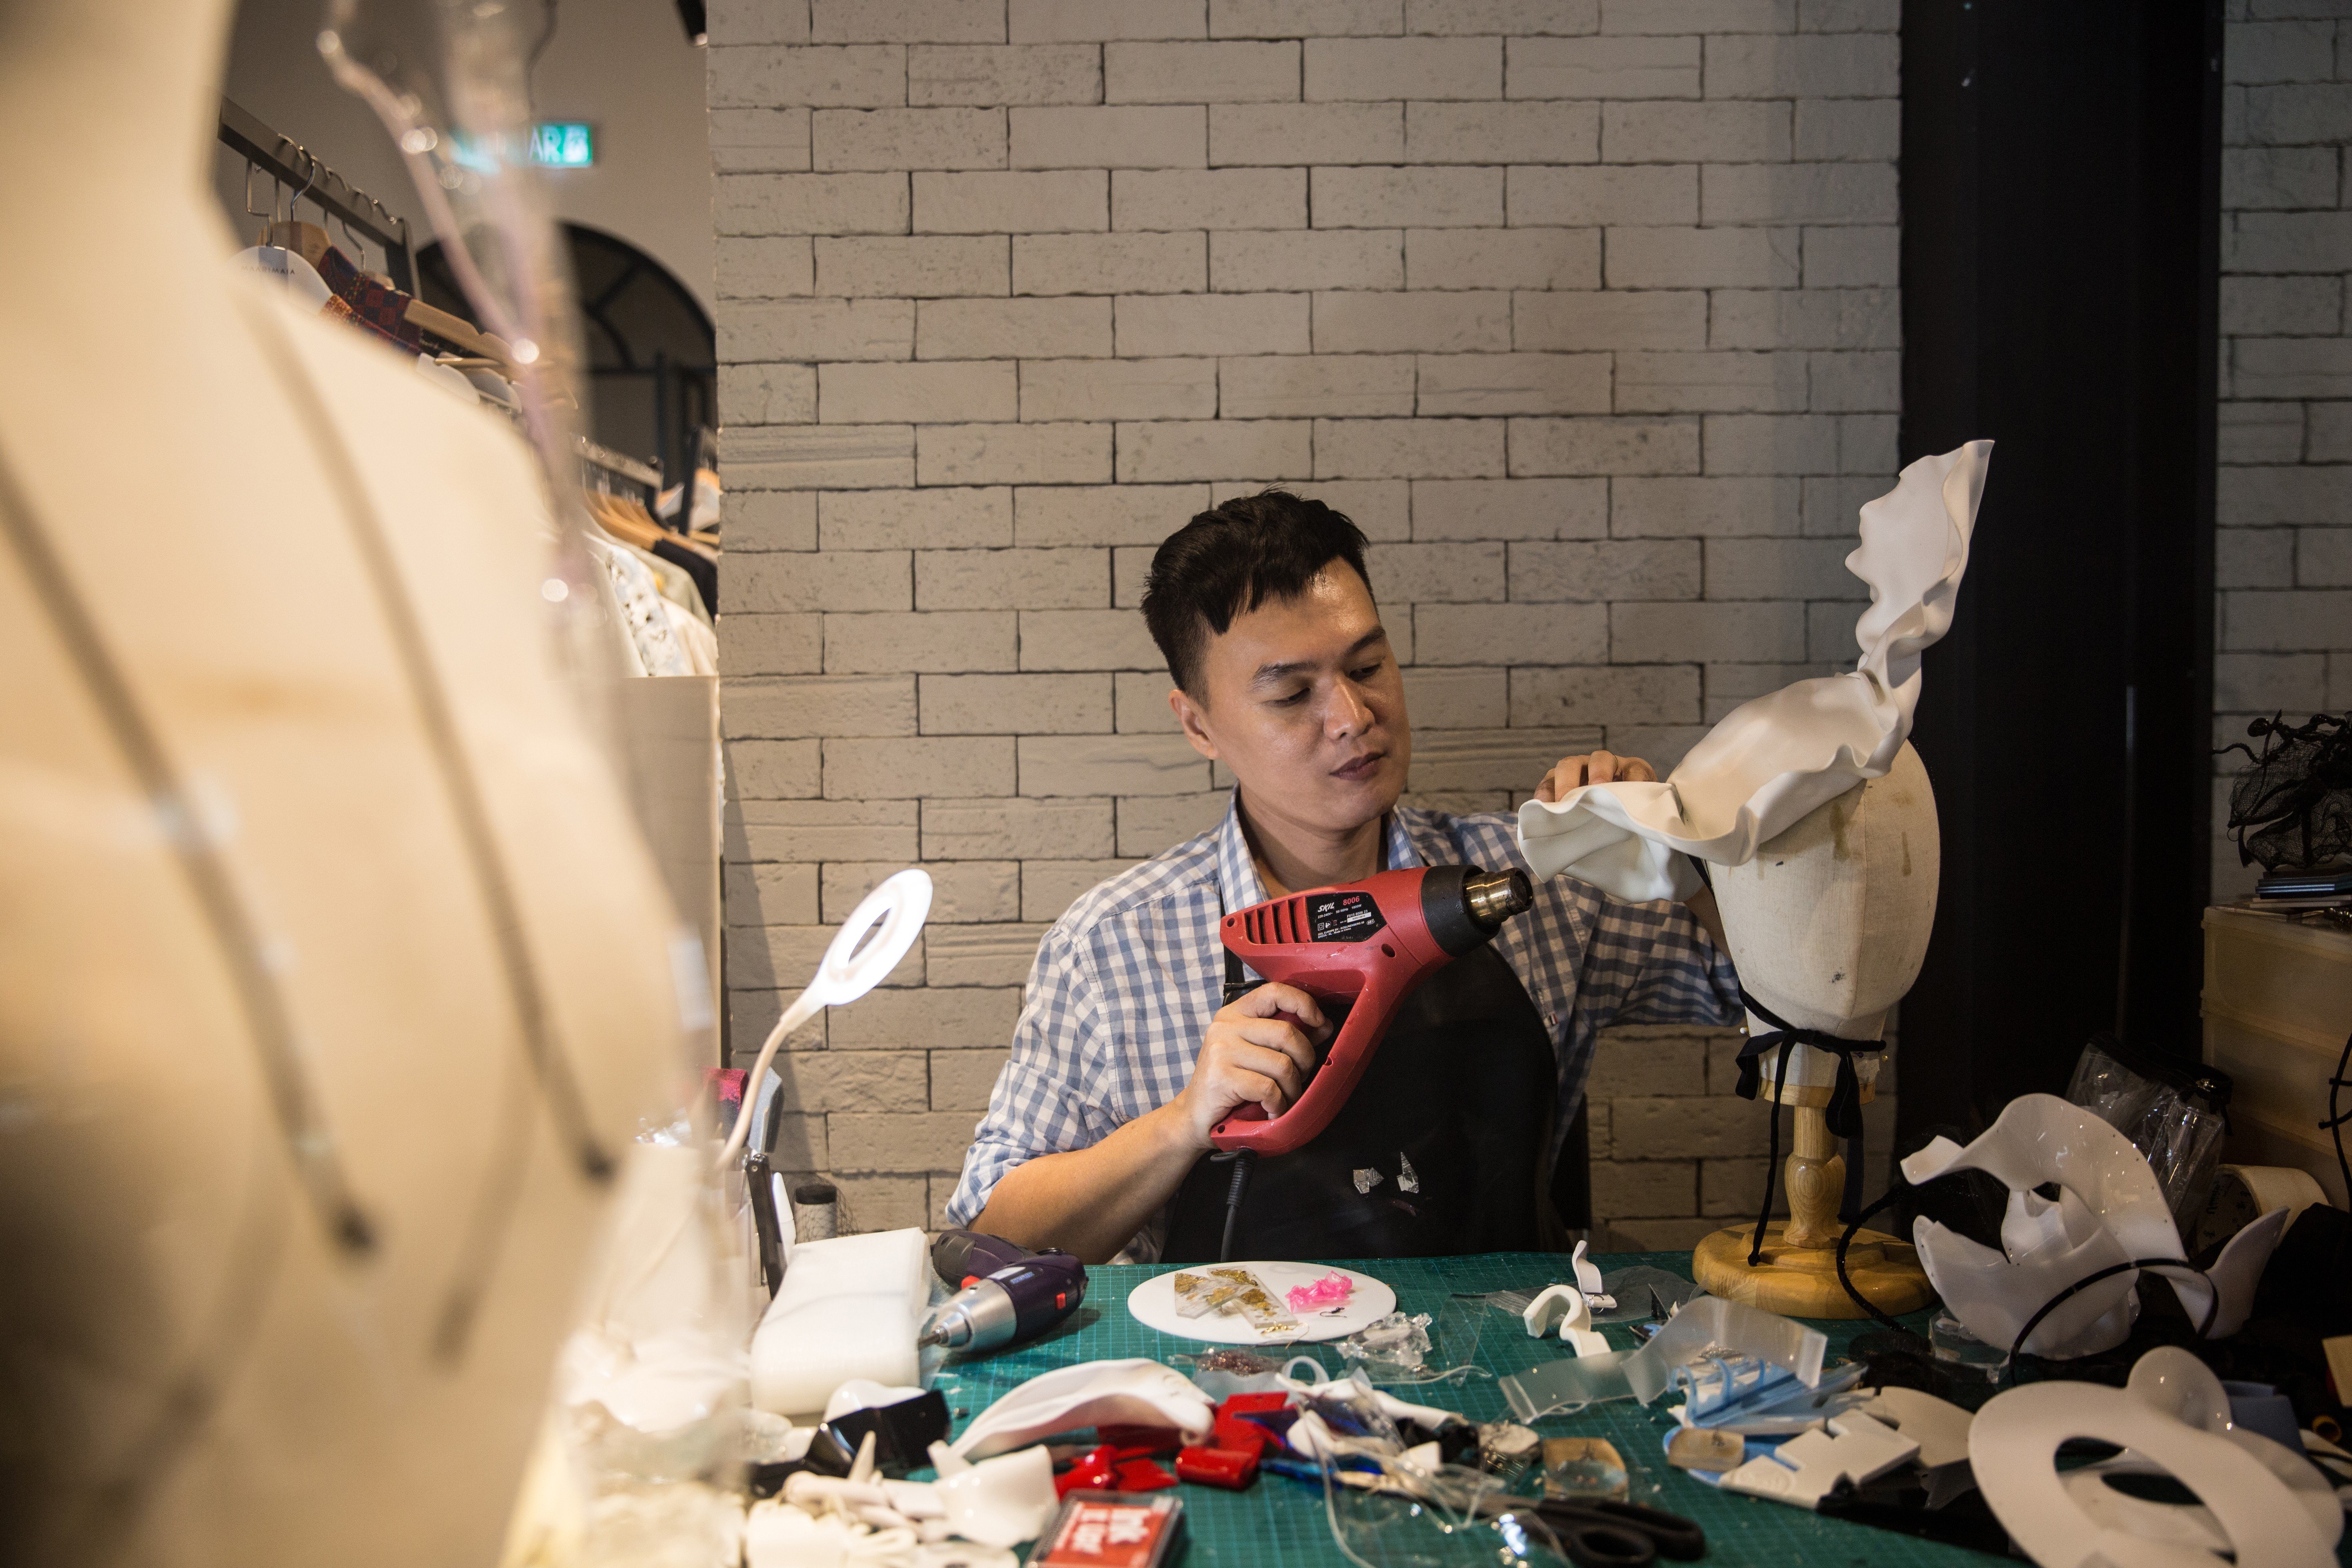 Malaysian milliner Bremen Wong in his atelier.